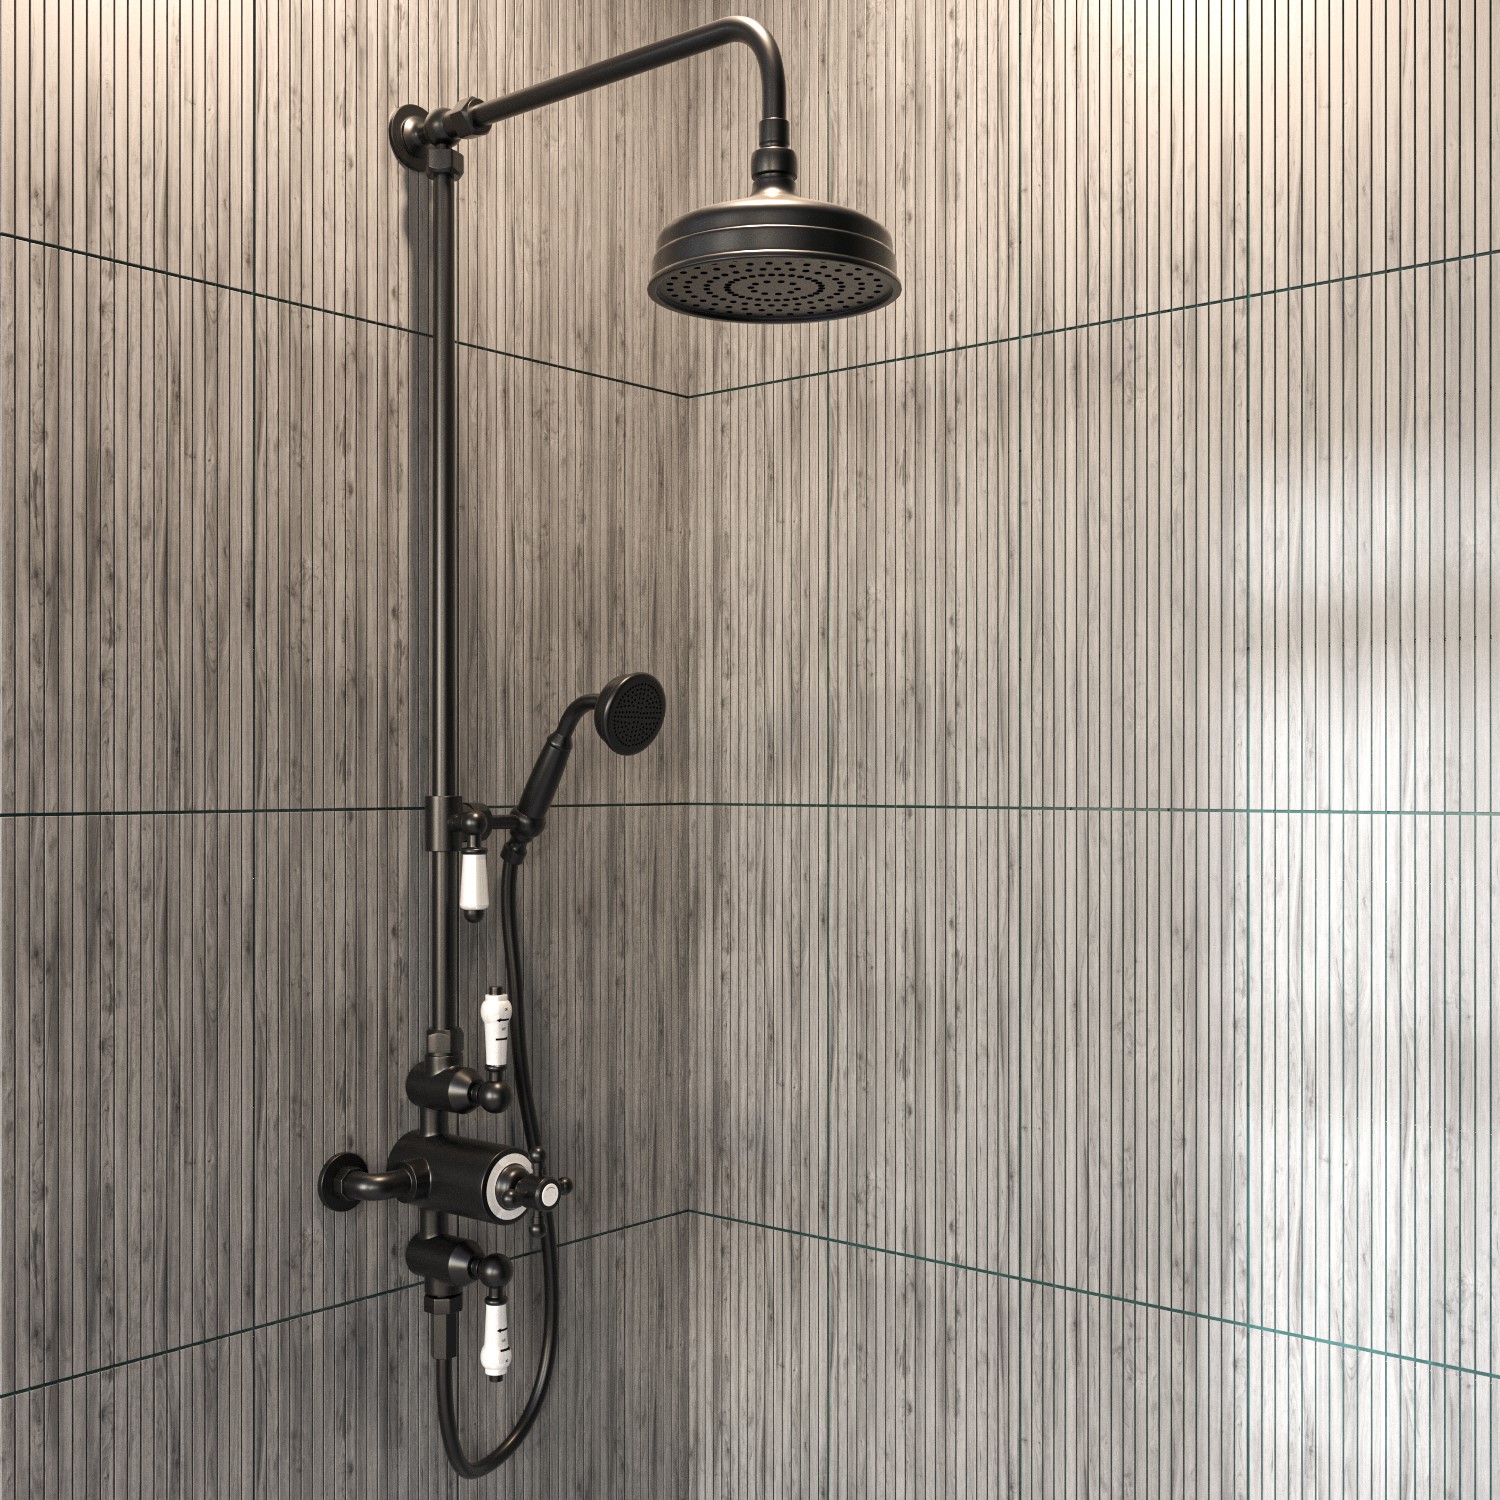 Black Traditional Thermostatic Shower with Round Overhead & Handset - Camden